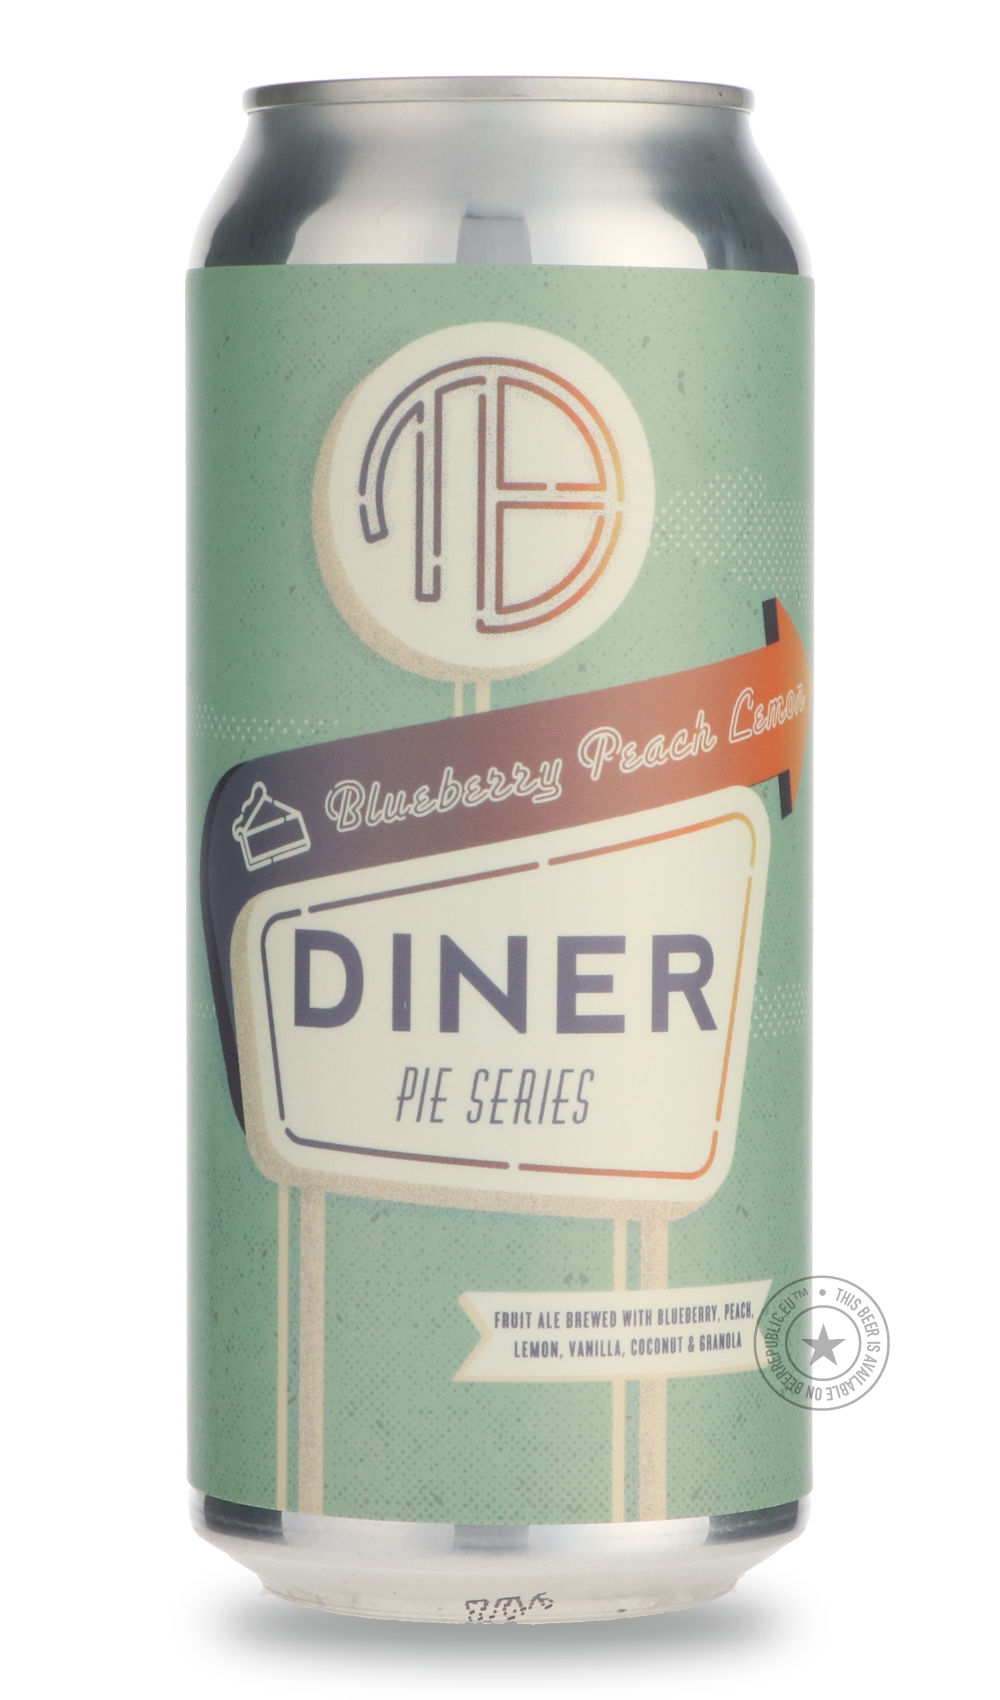 -Mortalis- Diner Pie Series | Blueberry + Peach + Lemon-Sour / Wild & Fruity- Only @ Beer Republic - The best online beer store for American & Canadian craft beer - Buy beer online from the USA and Canada - Bier online kopen - Amerikaans bier kopen - Craft beer store - Craft beer kopen - Amerikanisch bier kaufen - Bier online kaufen - Acheter biere online - IPA - Stout - Porter - New England IPA - Hazy IPA - Imperial Stout - Barrel Aged - Barrel Aged Imperial Stout - Brown - Dark beer - Blond - Blonde - Pil